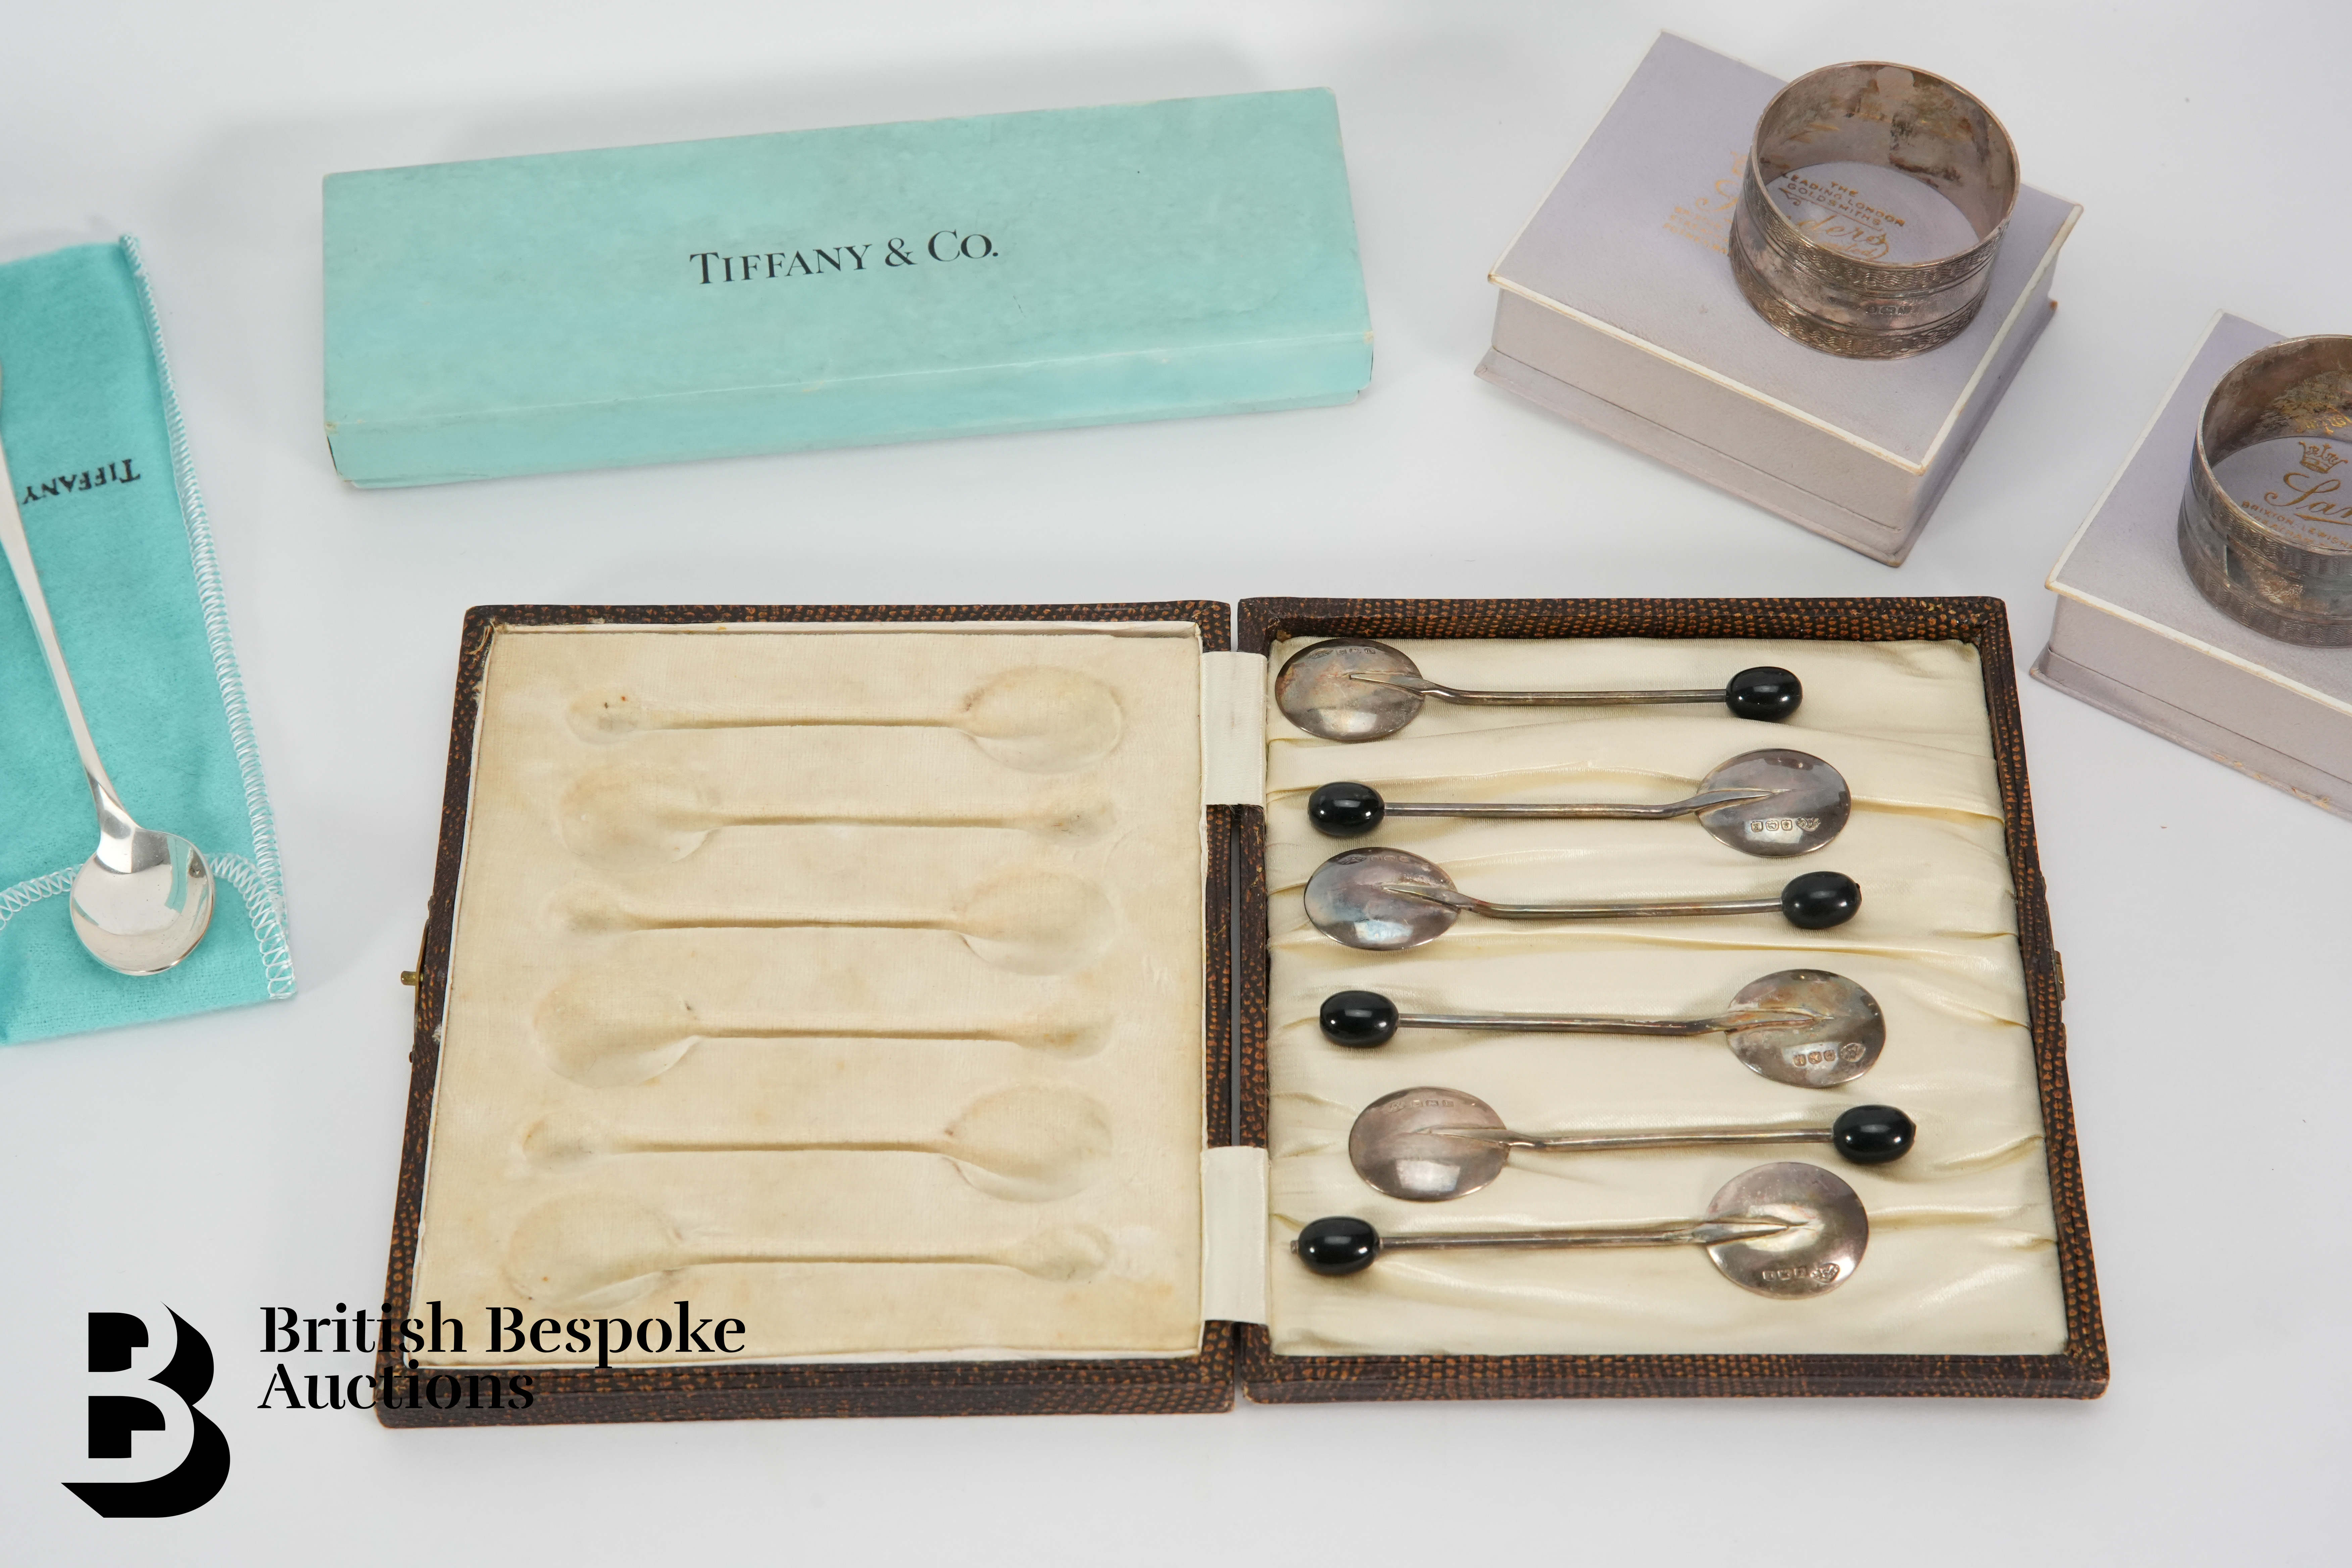 Tiffany & Co Silver Spoon and Baby Rattle - Image 3 of 4